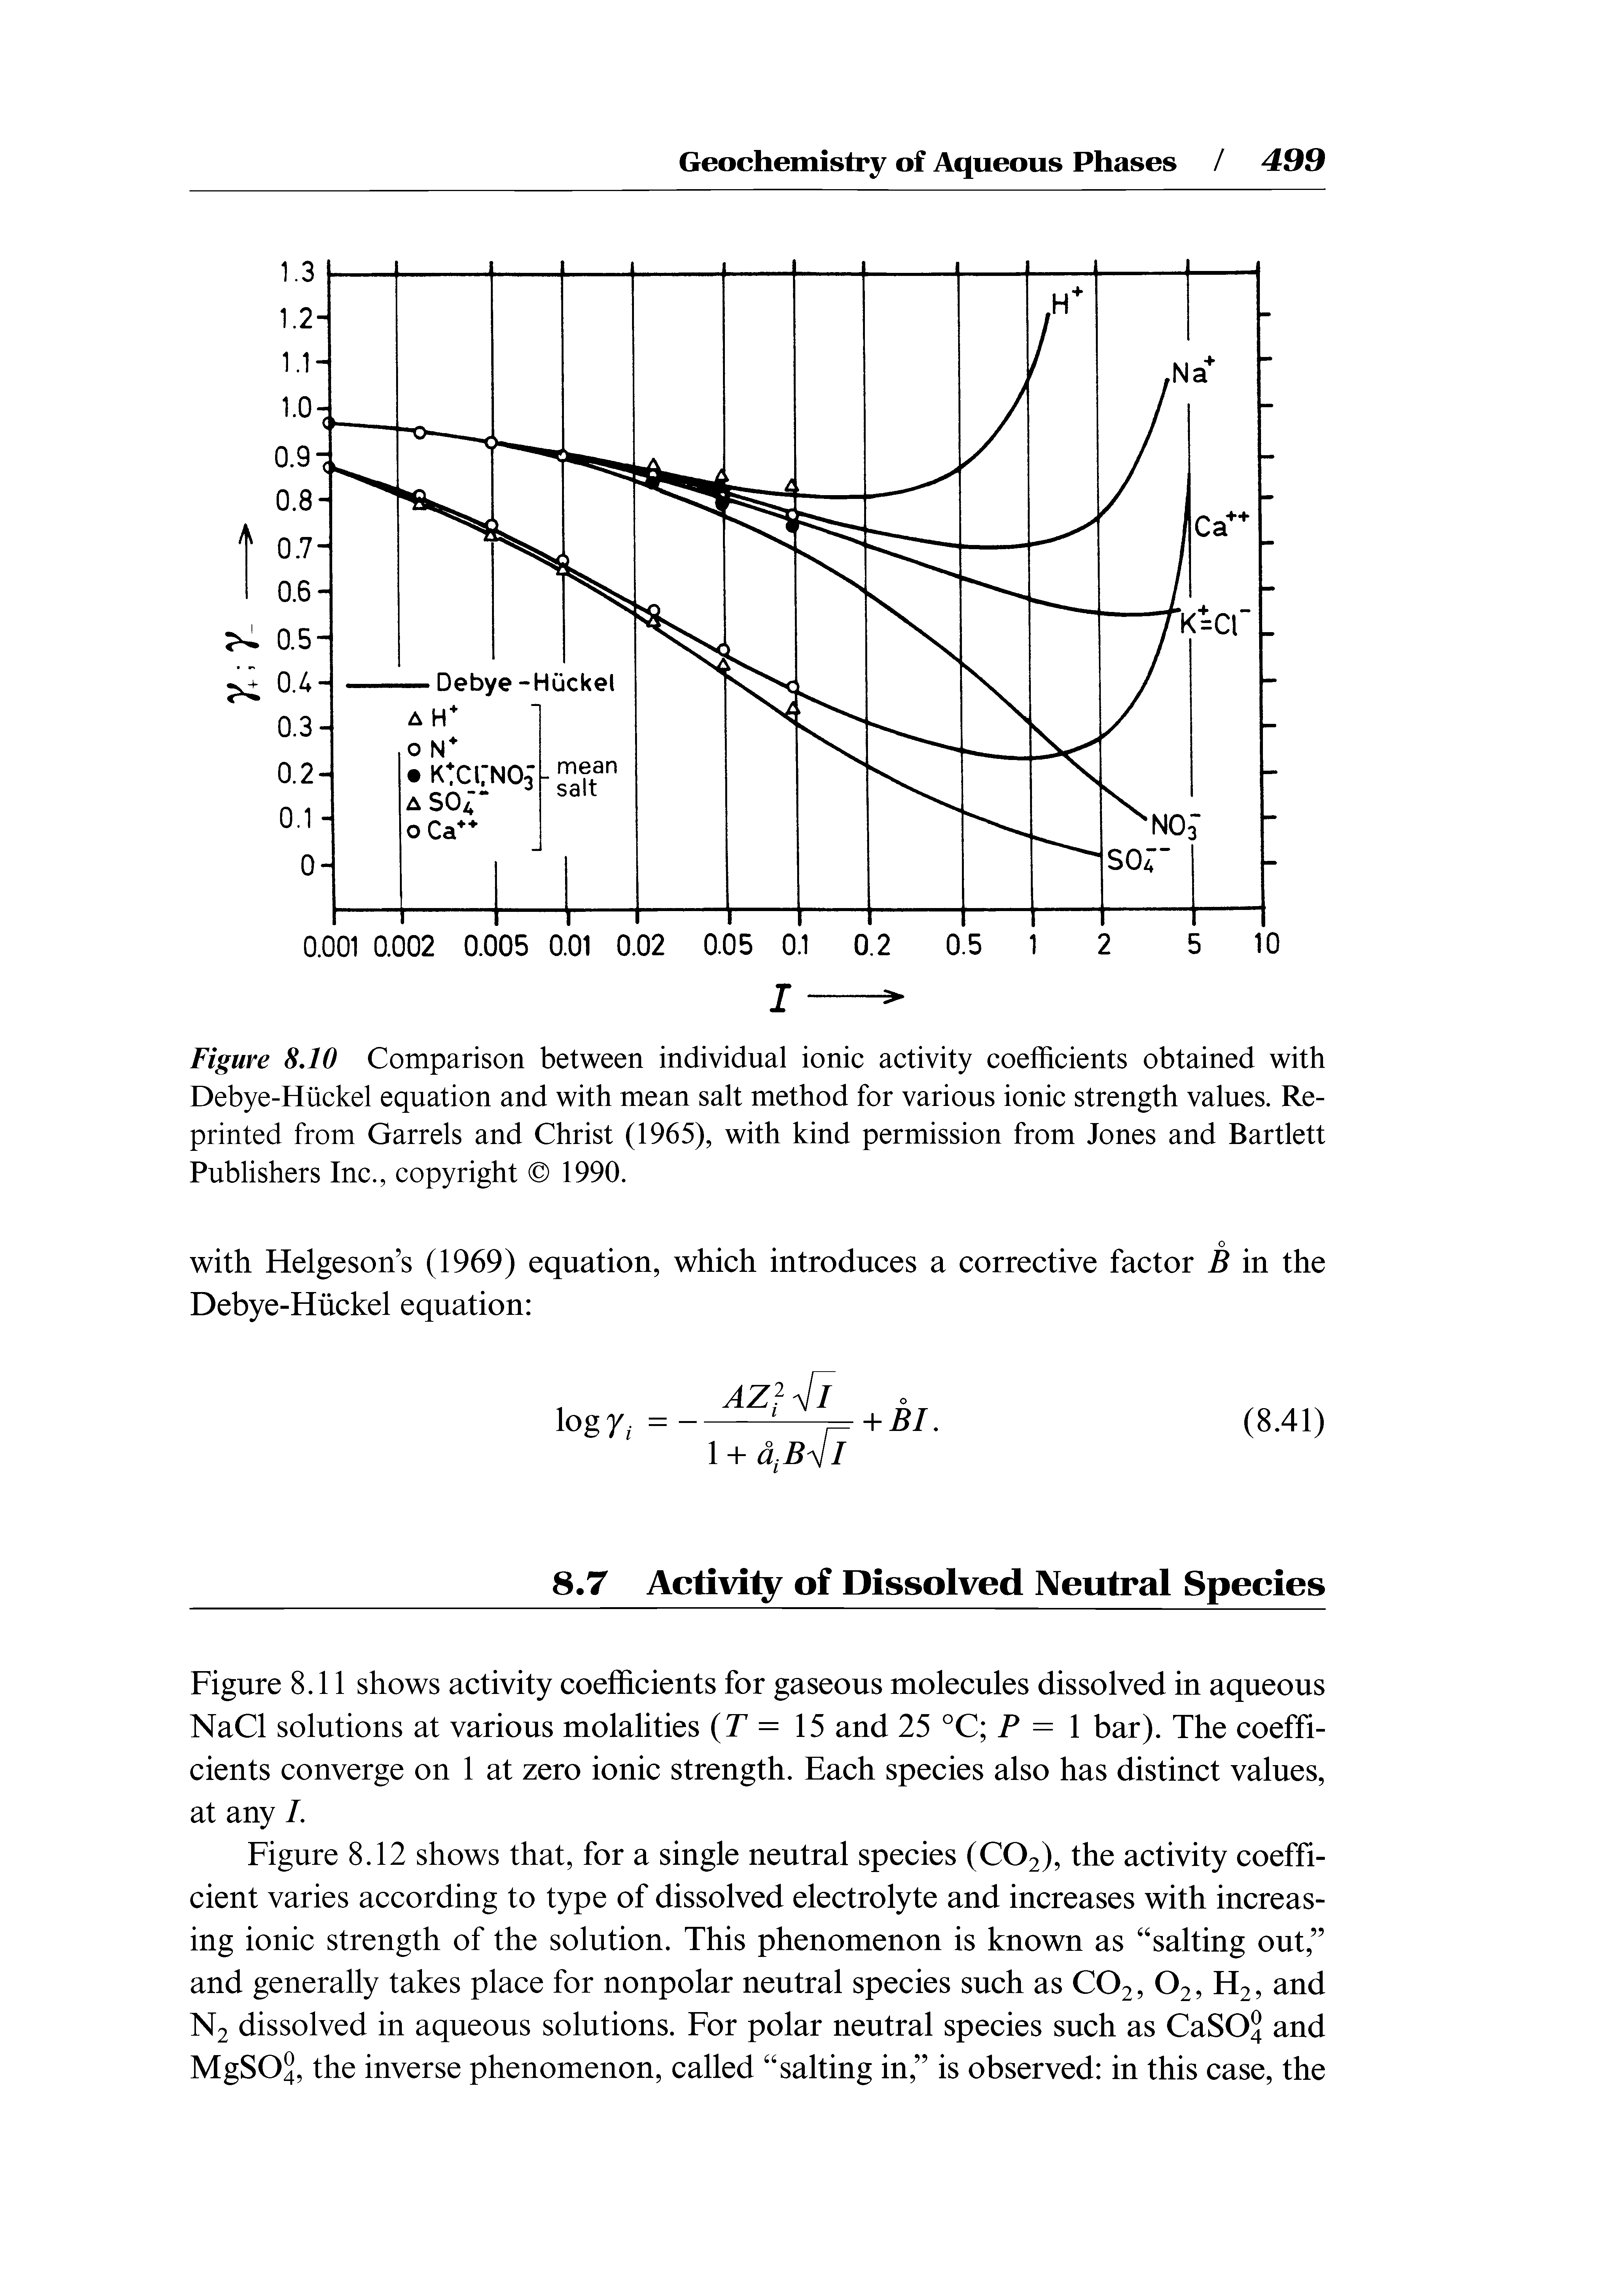 Figure 8JO Comparison between individual ionic activity coefficients obtained with Debye-Hiickel equation and with mean salt method for various ionic strength values. Reprinted from Garrels and Christ (1965), with kind permission from Jones and Bartlett Publishers Inc., copyright 1990.